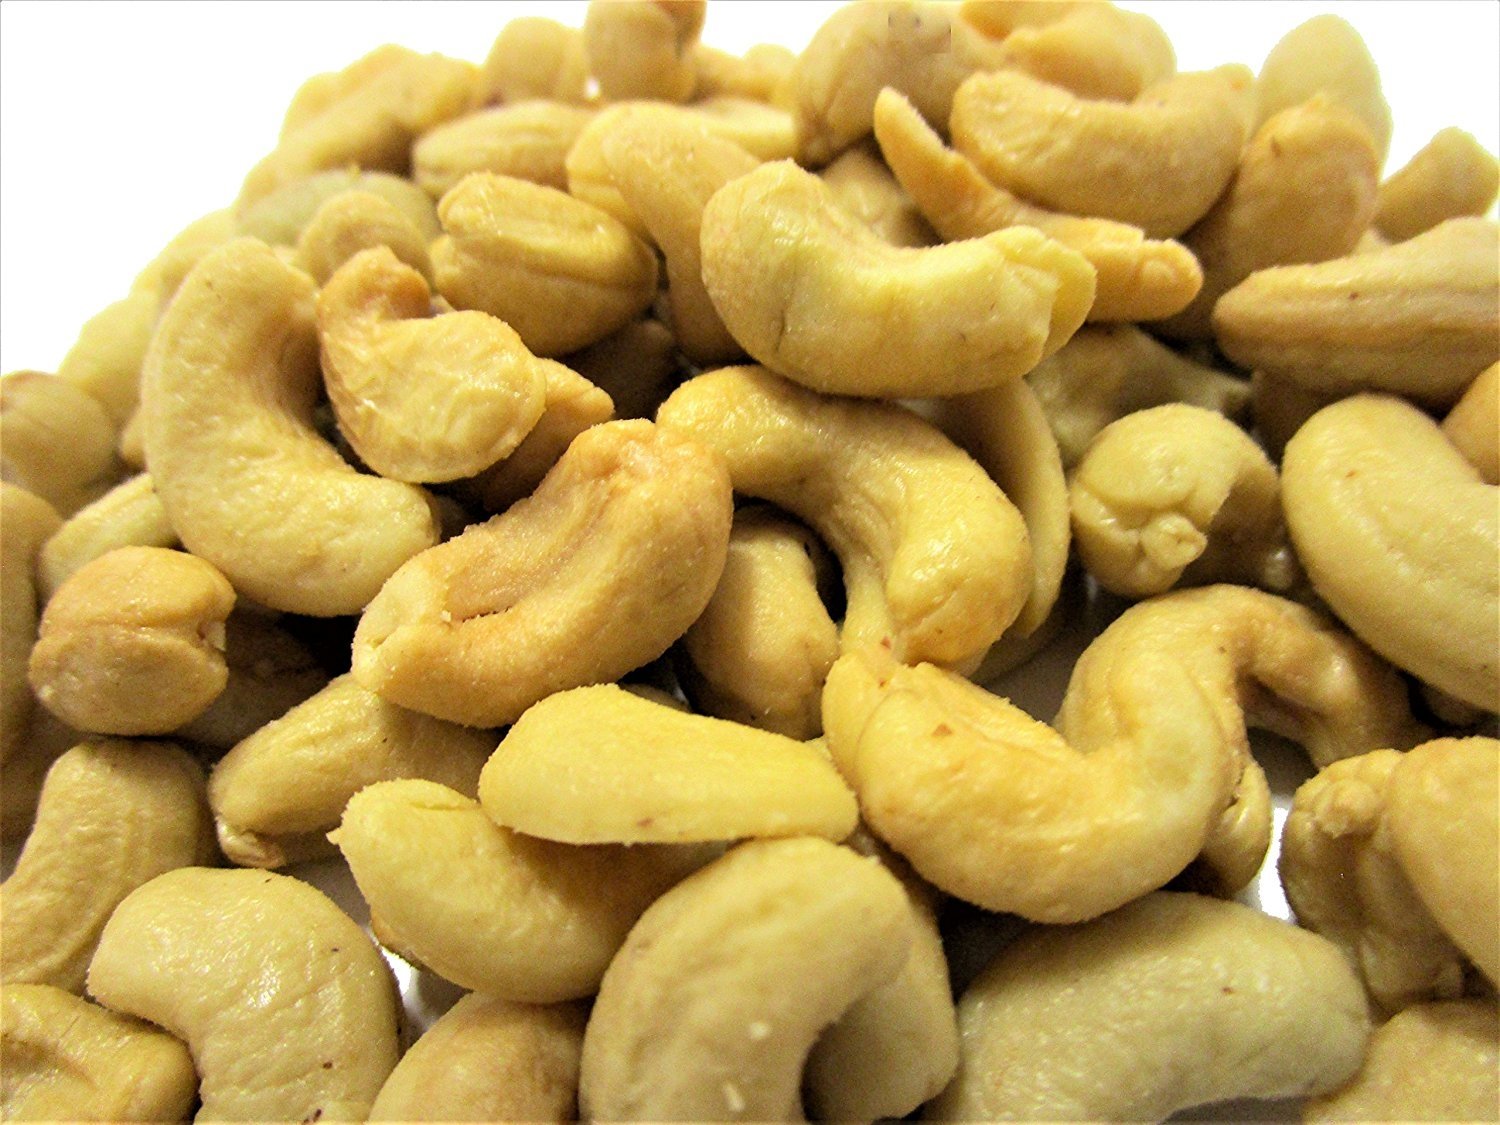 It's Delish Gourmet Roasted & Salted Cashews , Five pounds